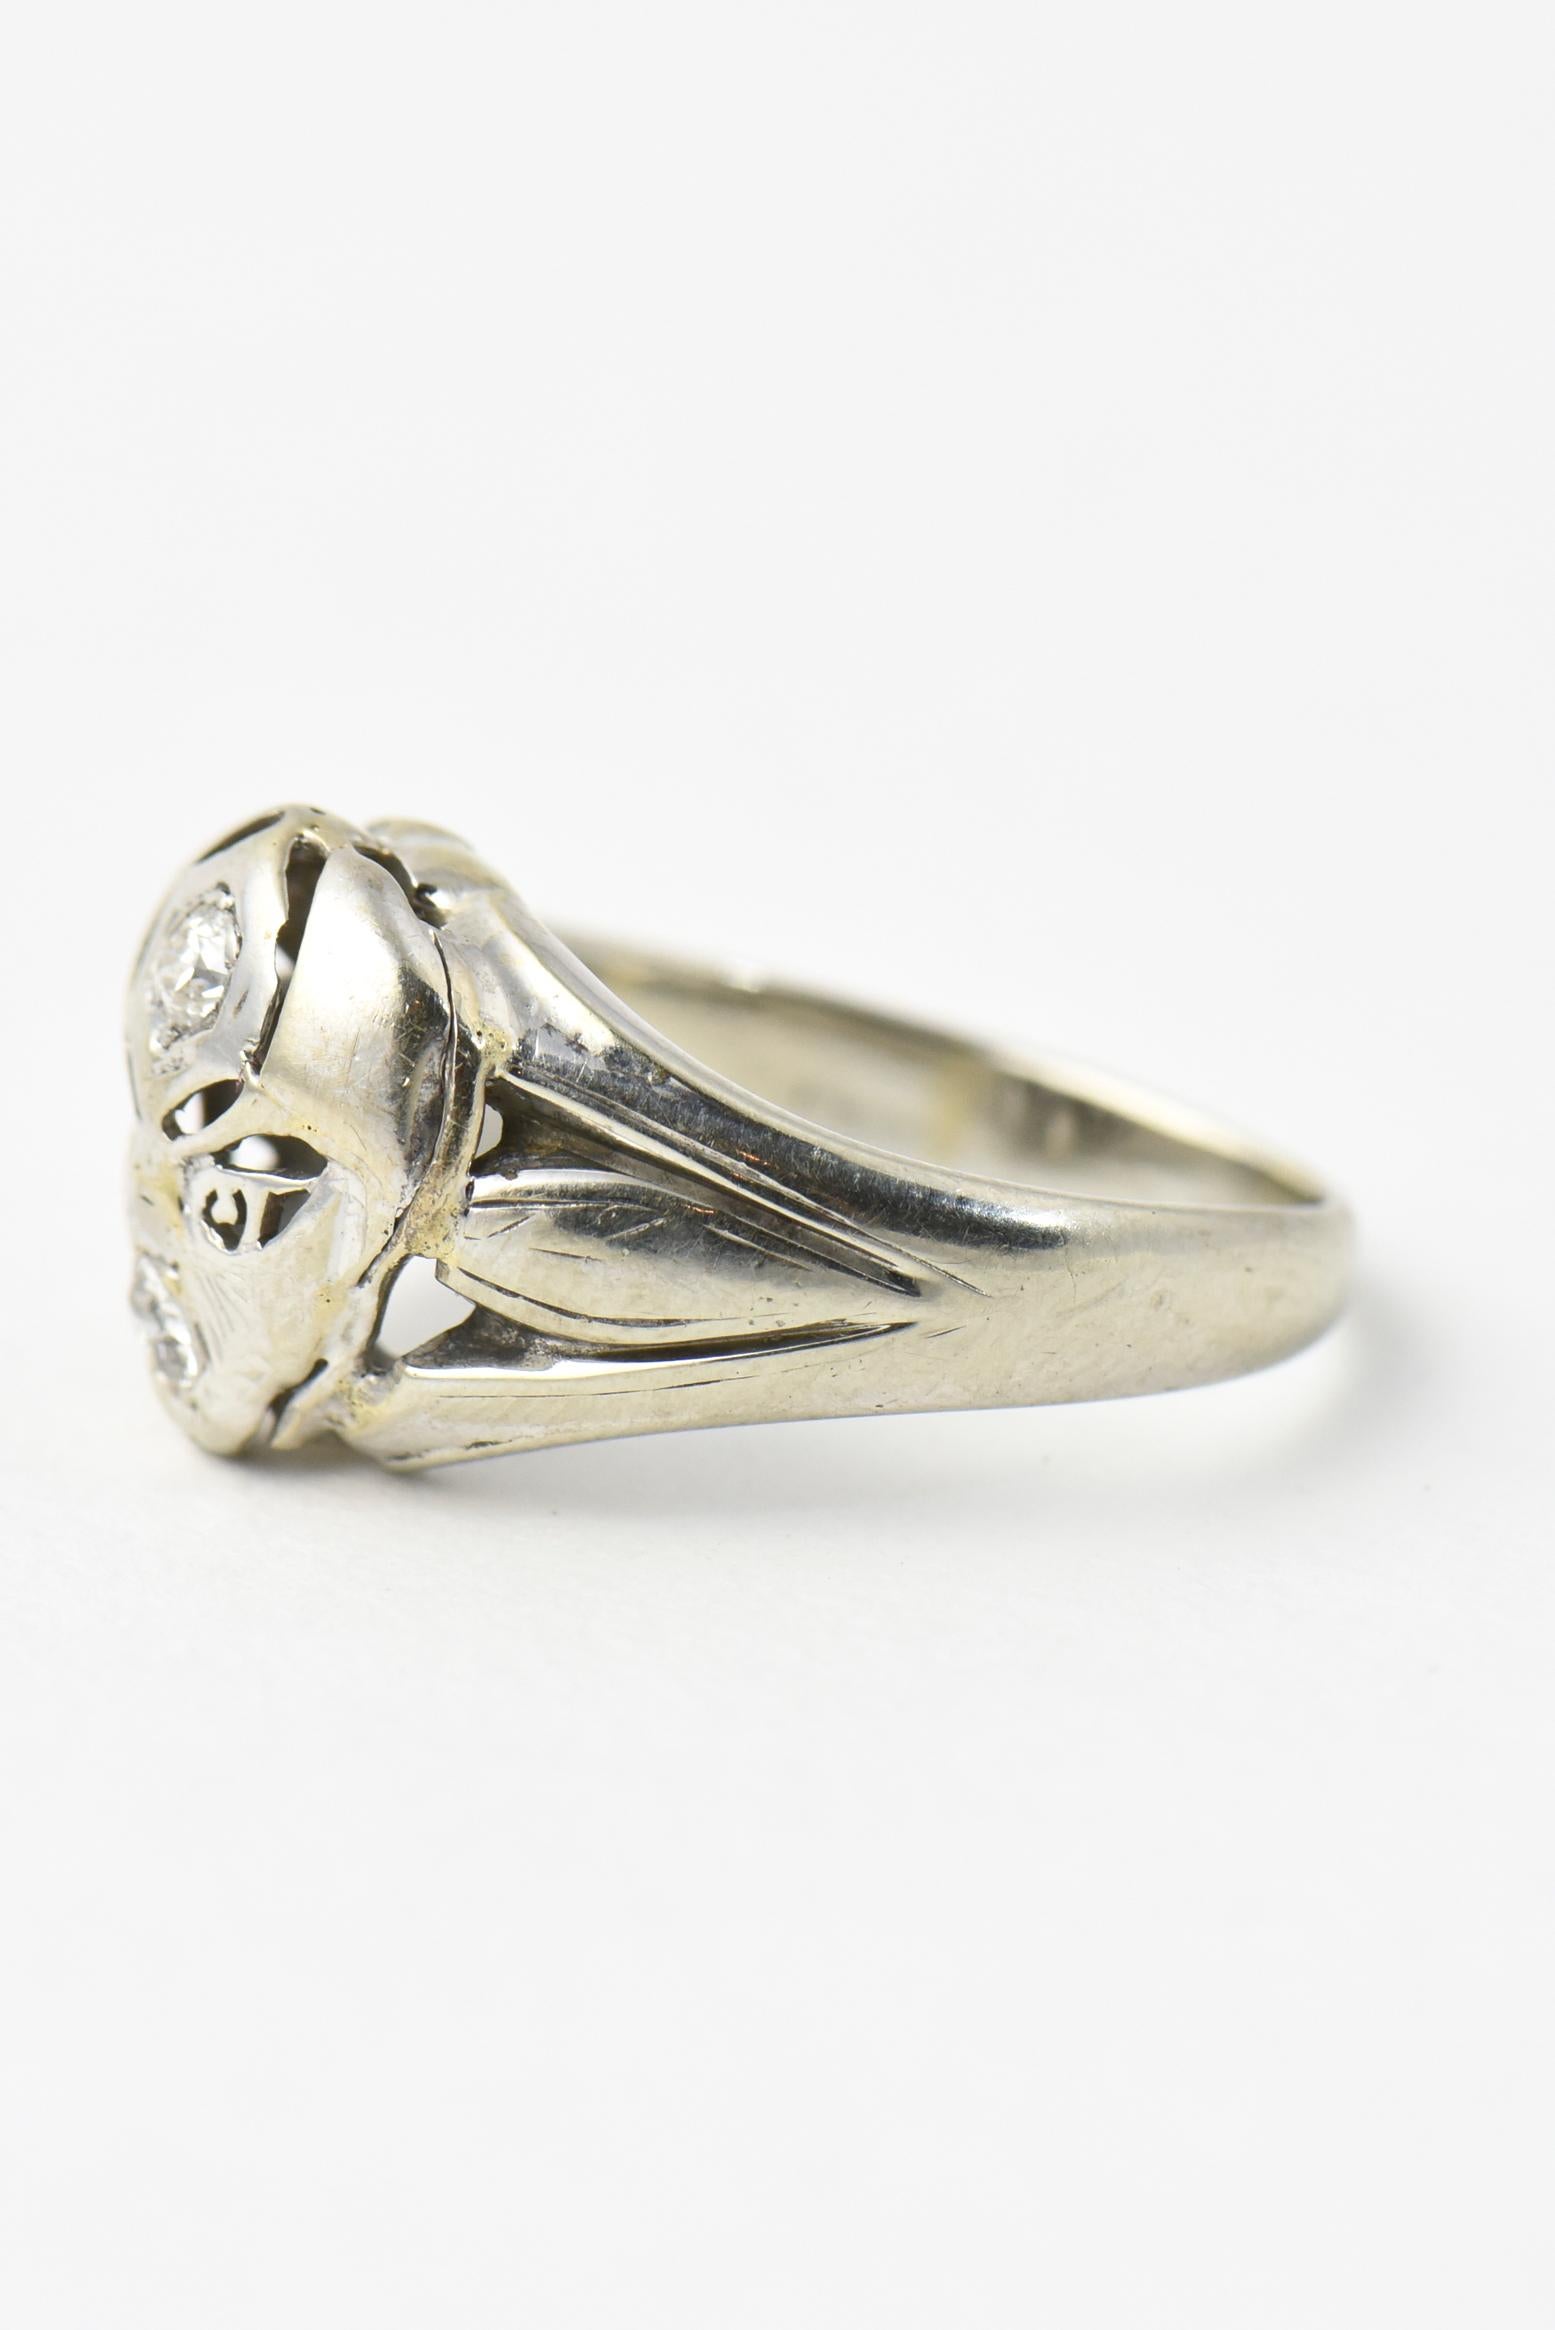 Round Cut Diamond Alien Abstract or Masonic Looking Face White Gold Ring For Sale